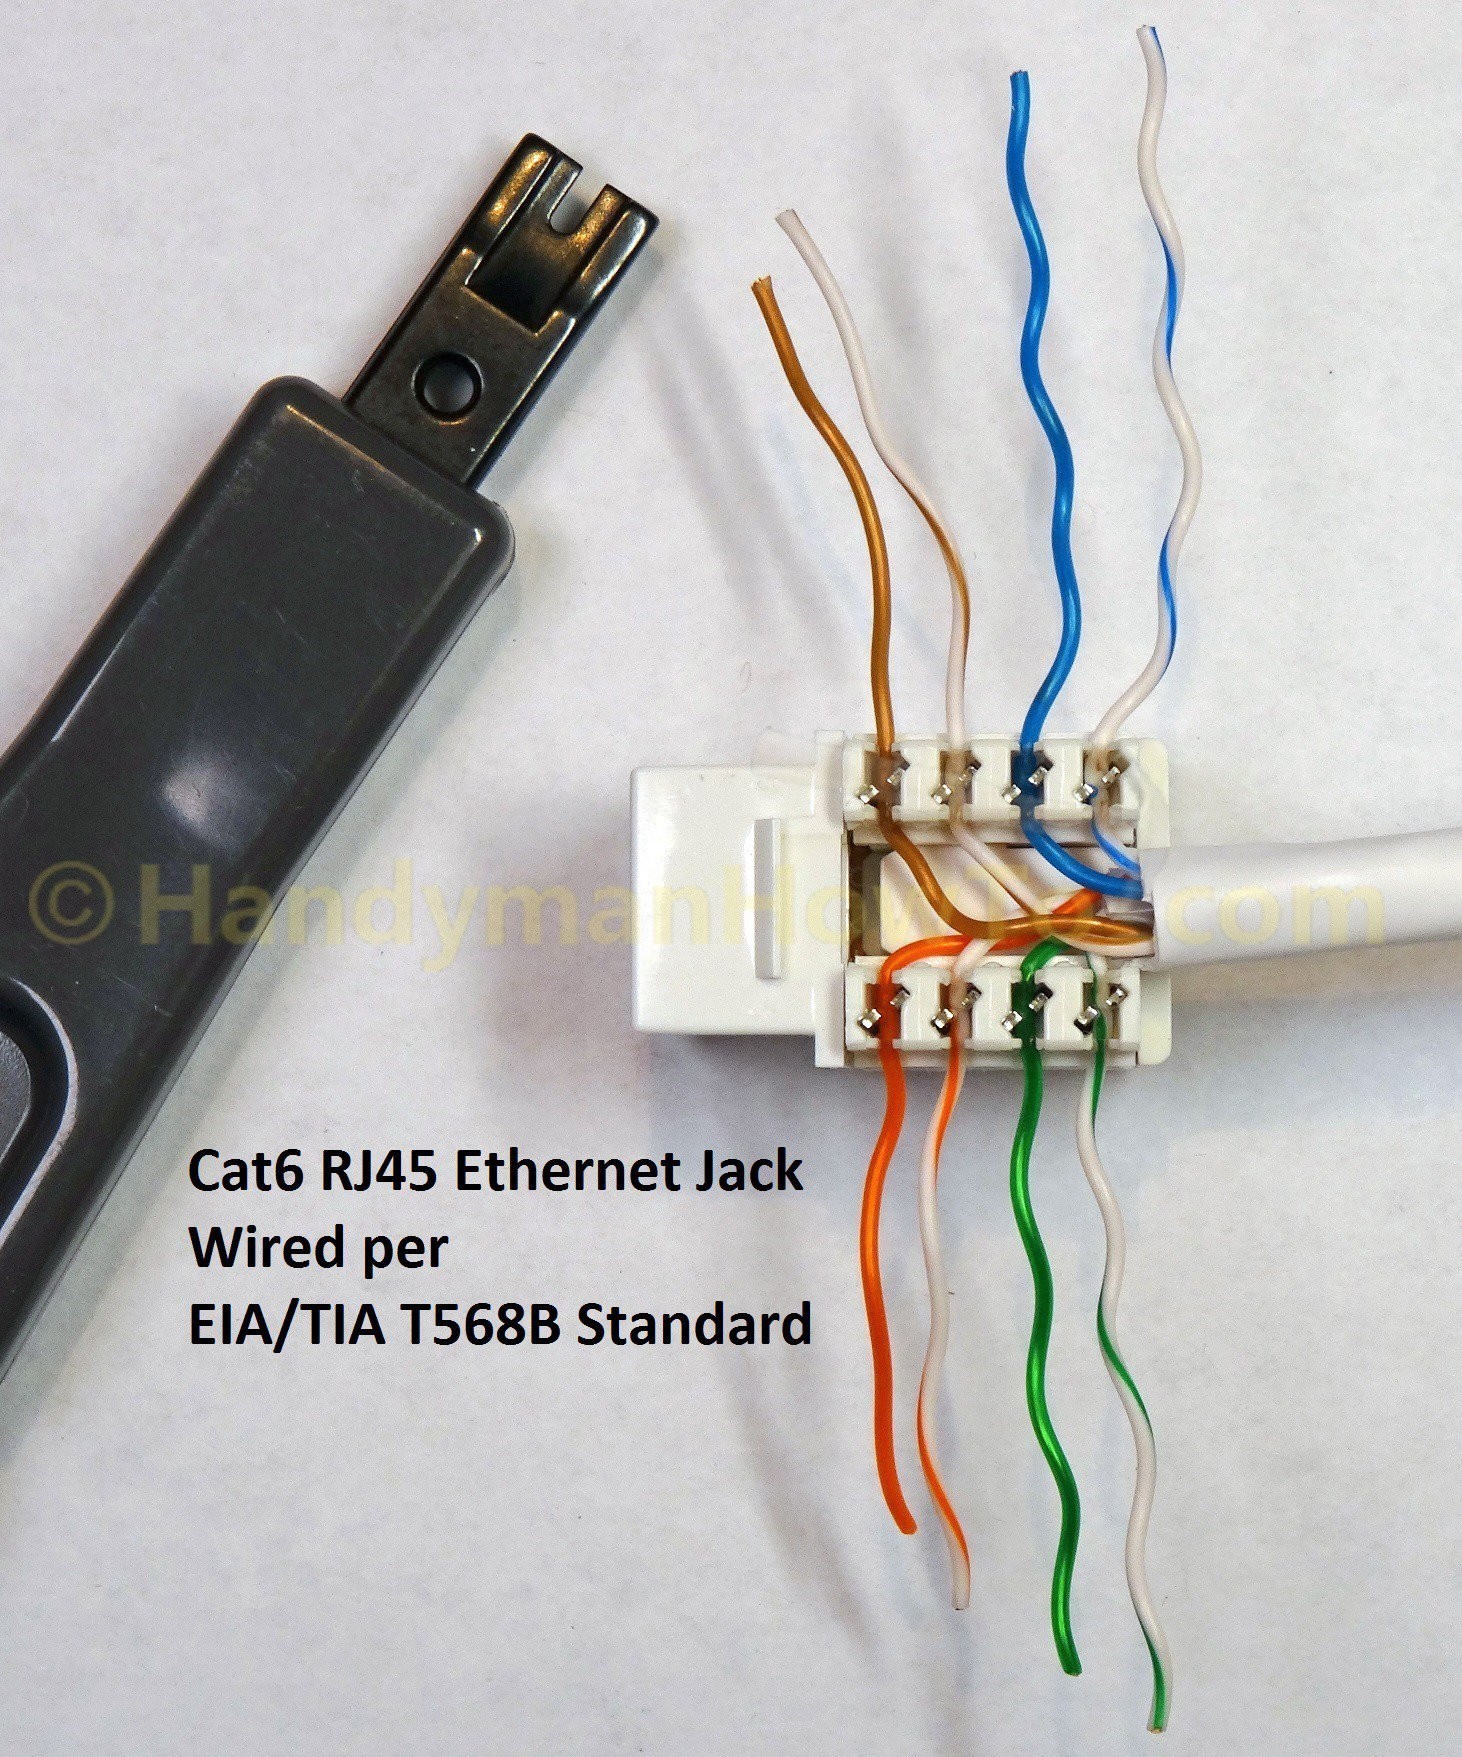 Cat5e Wiring Diagram Keystone Jack Refrence Cat6 Punch Down Wiring Diagram Sample